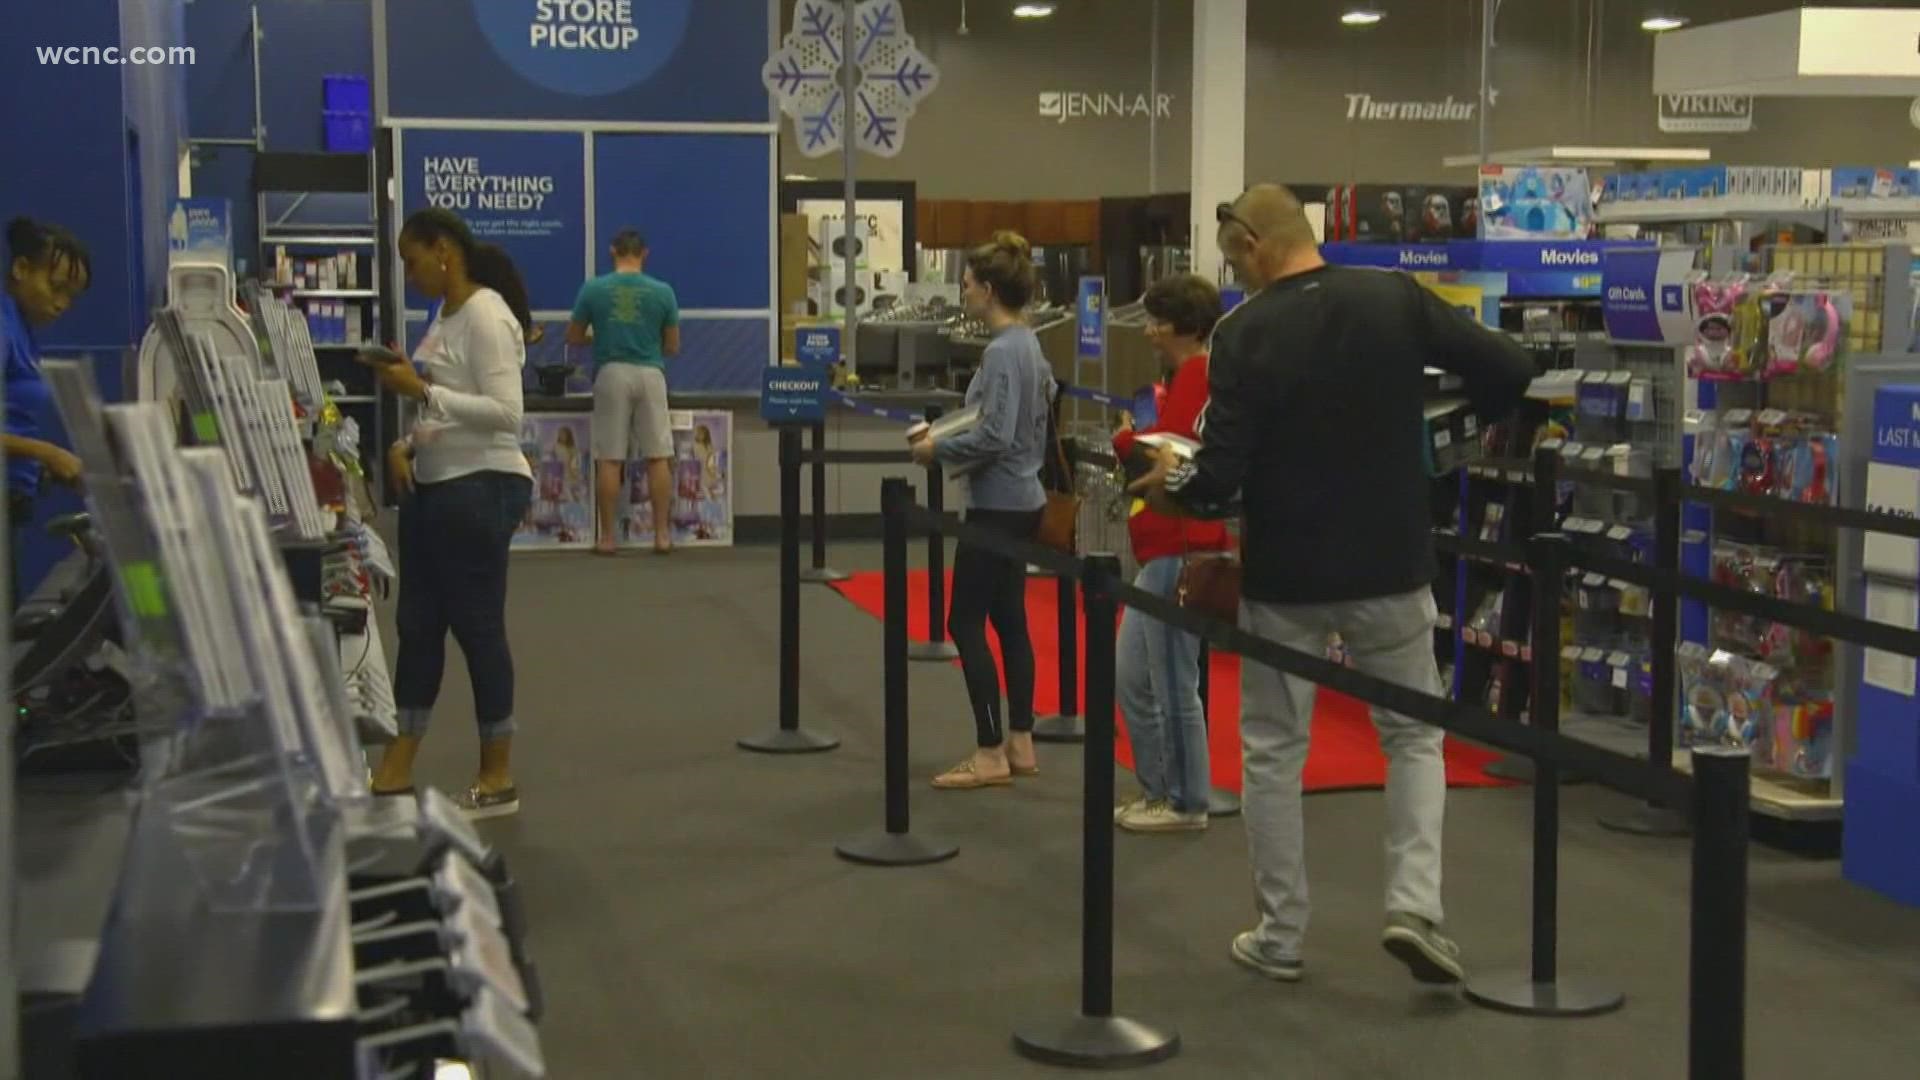 WHERE'S THE MONEY? A lot of people are trying to return items after the holidays, but some retail experts are seeing some trends that may impact you.